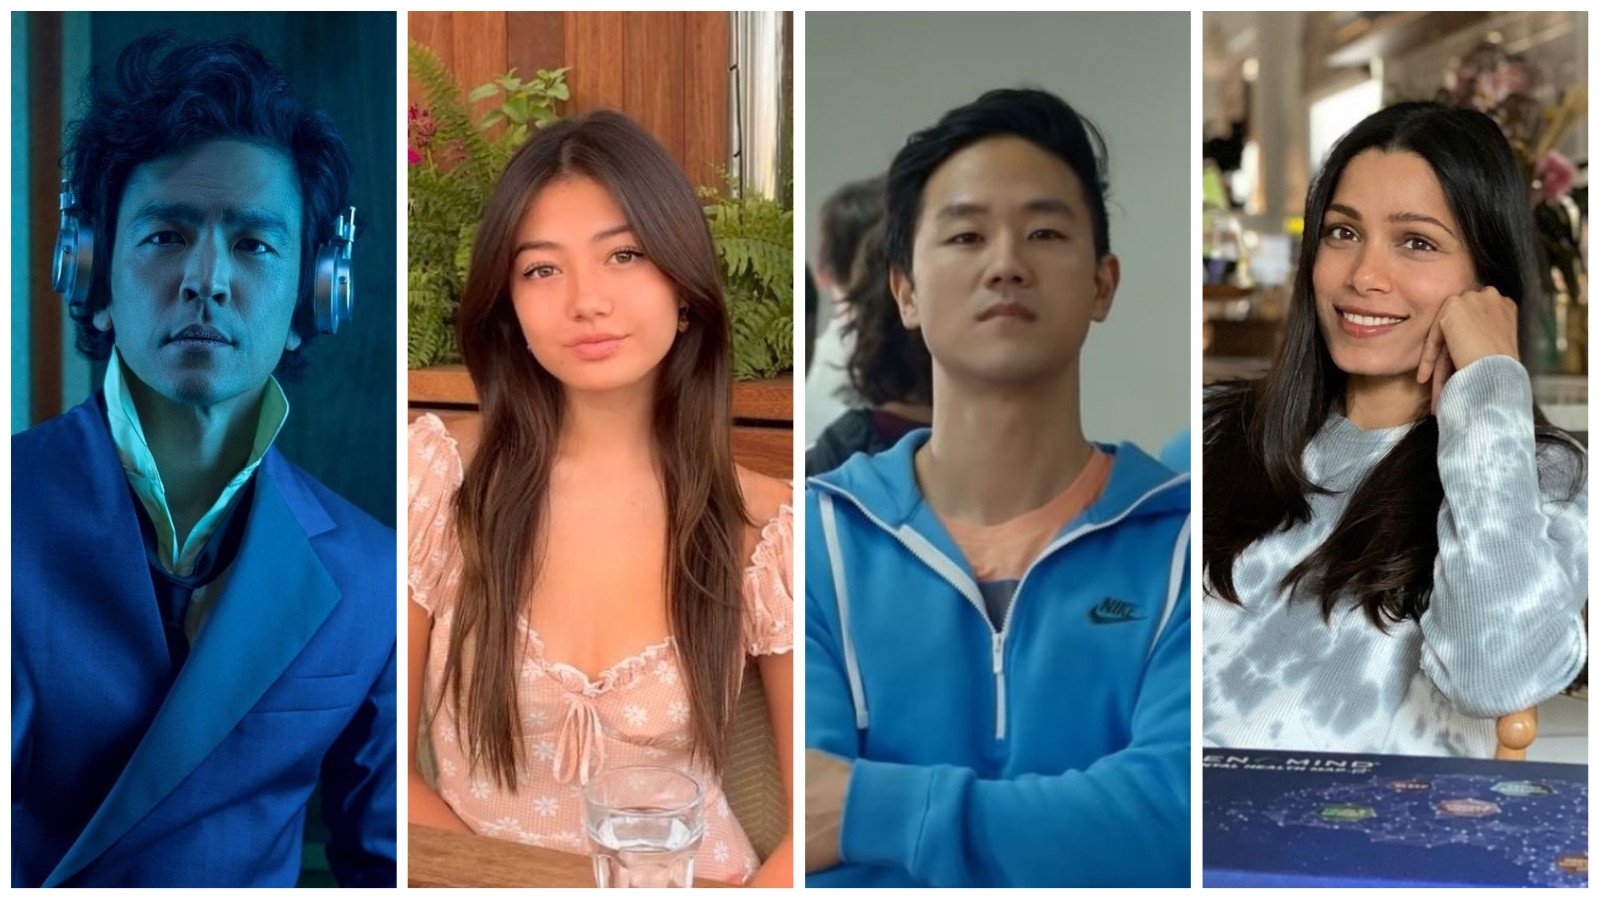 Check out these Asian-led films and TV shows on Netflix this autumn: John Cho in Cowboy Bebop, Miku Martineau in Kate, Joe Seo in Cobra Kai season 4 and Freida Pinto in Intrusion. Photos: @johnthecho, @miku.martineau, @joejoeseo, @freidapinto/Instagram